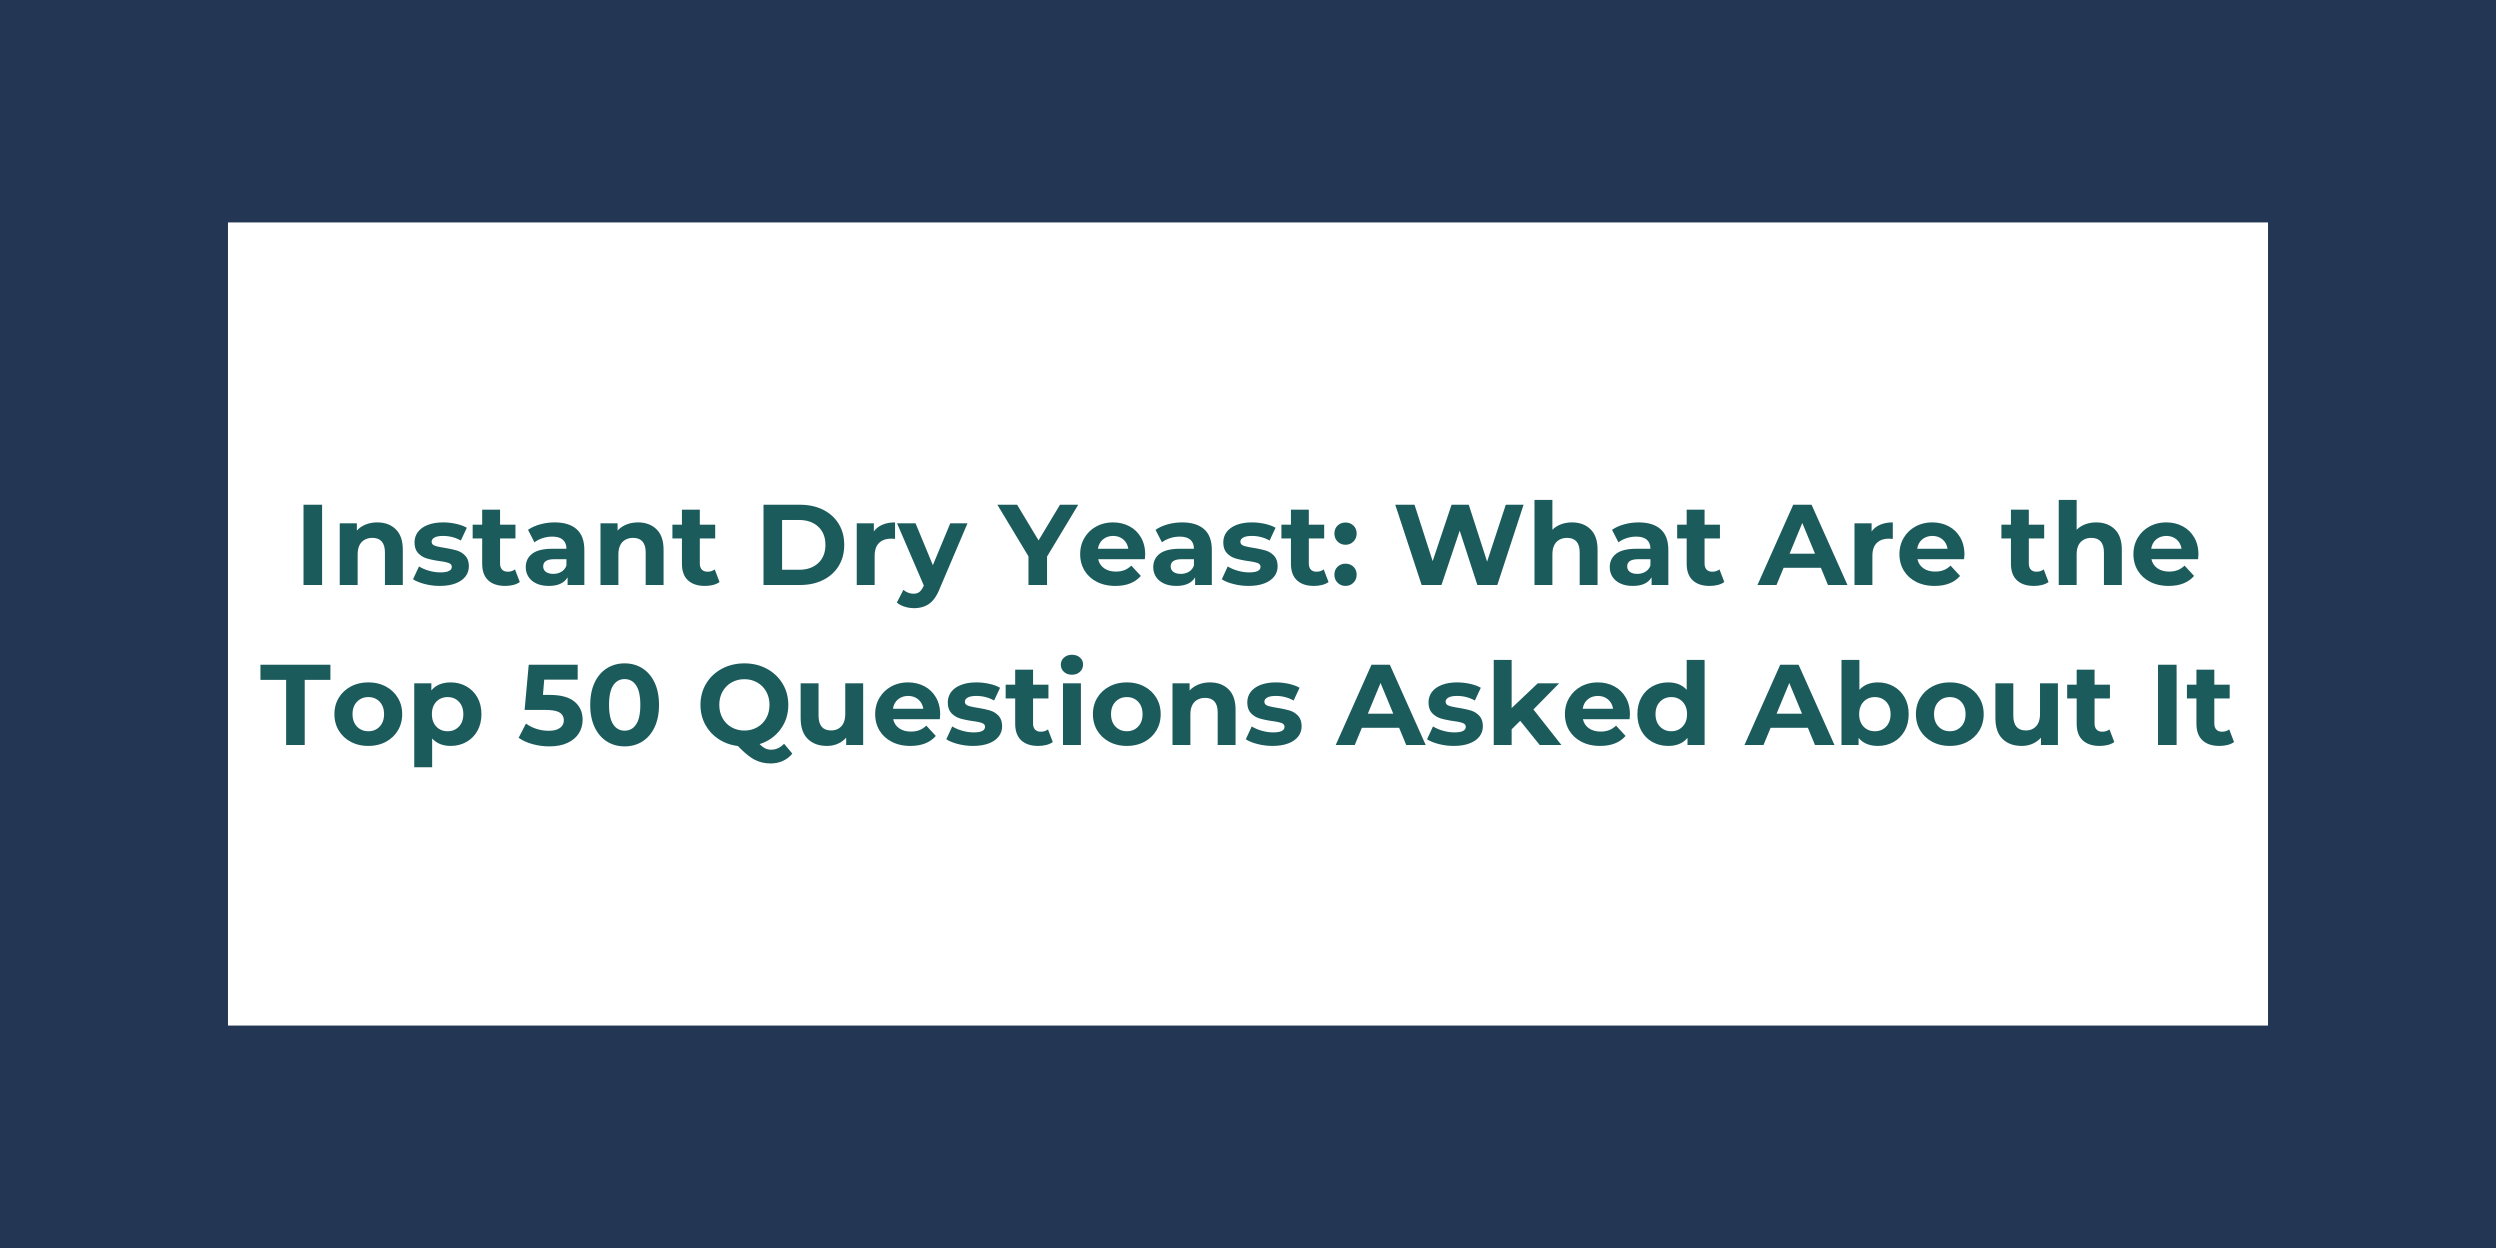 Instant Dry Yeast: What Are the Top 50 Questions Asked About It